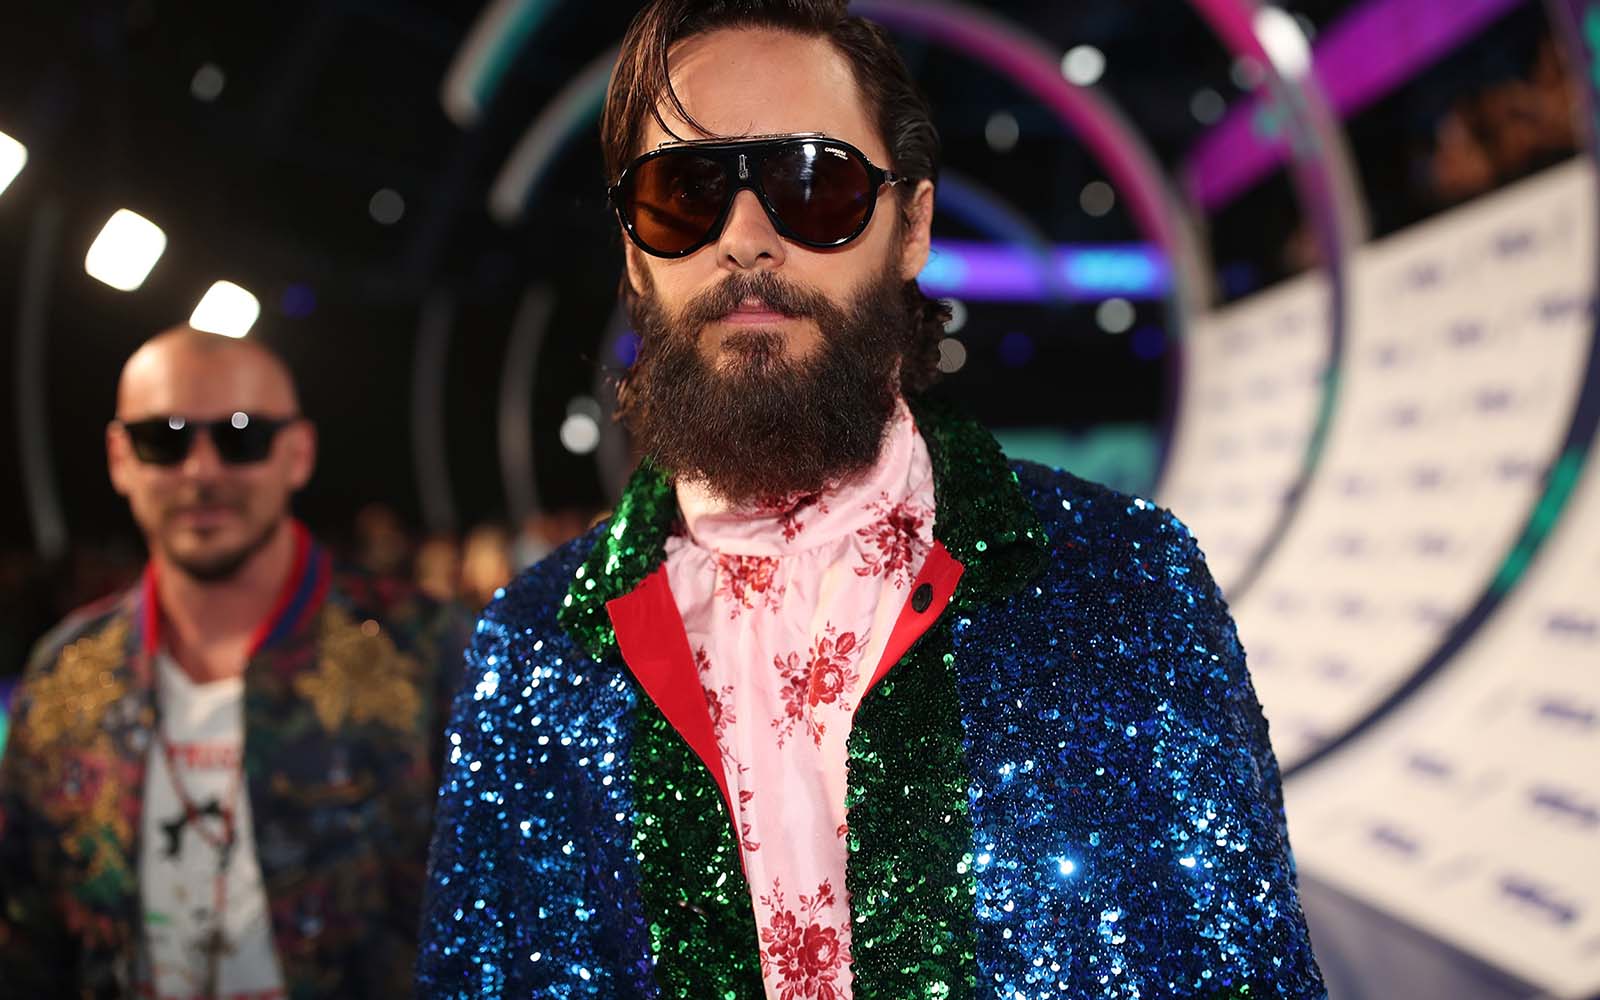 man wearing an outrageous suit